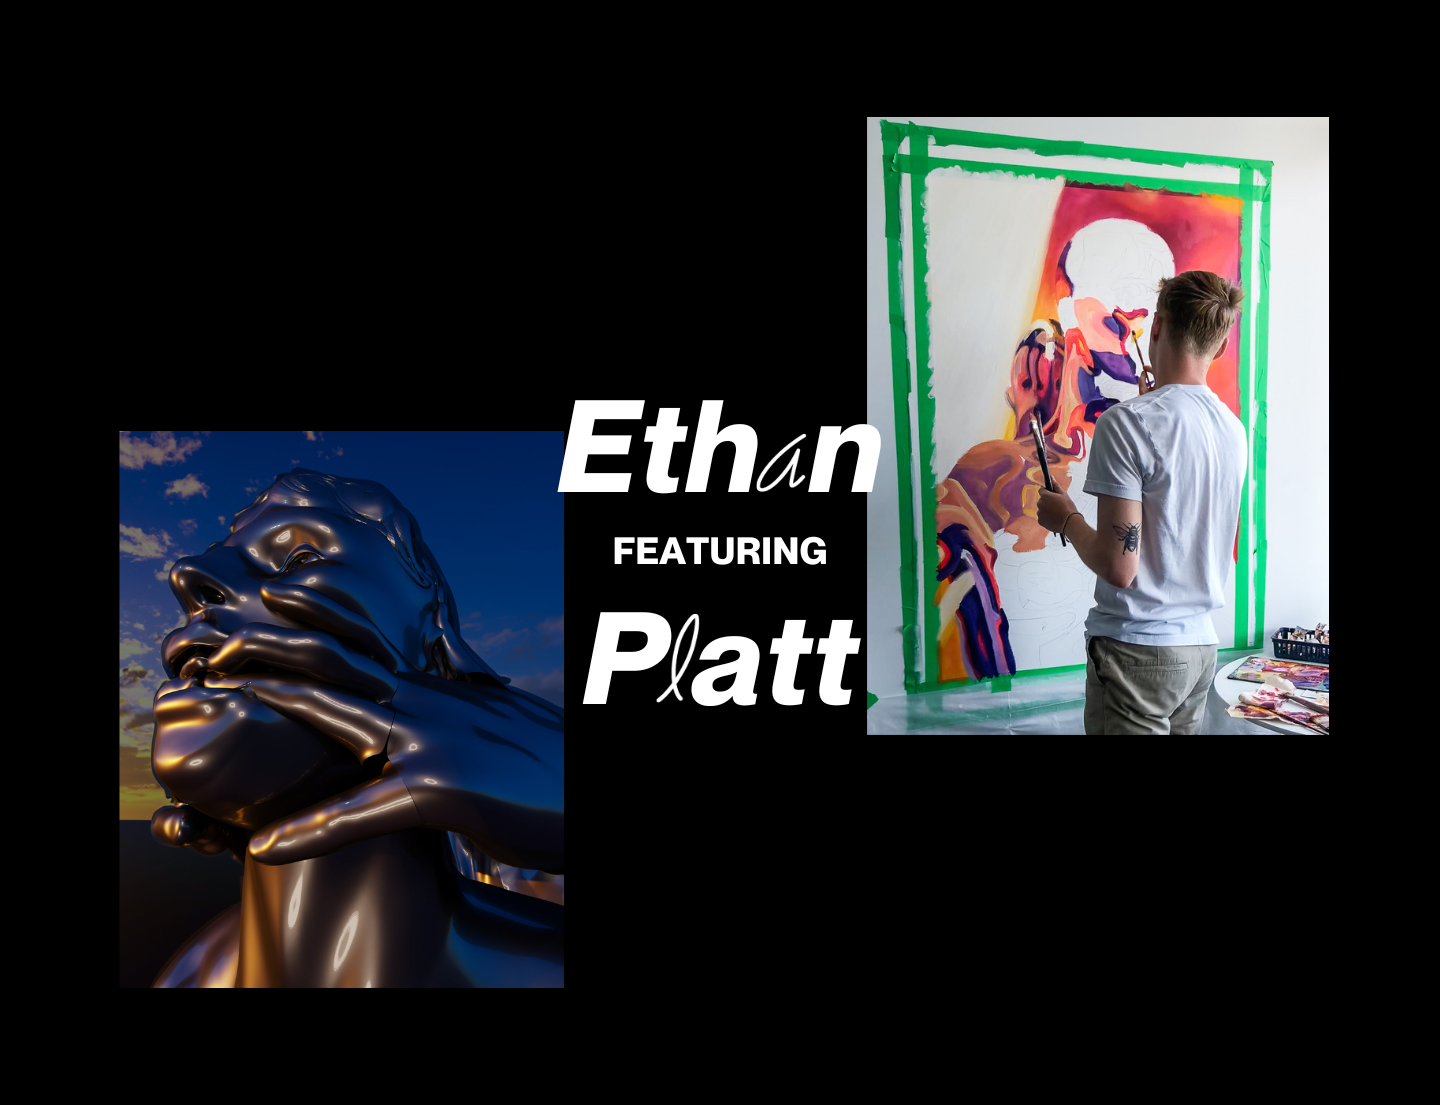 The words "Featuring Ethan Platt" overlayed on top of an image of a person painting in studio and an image of their artwork.